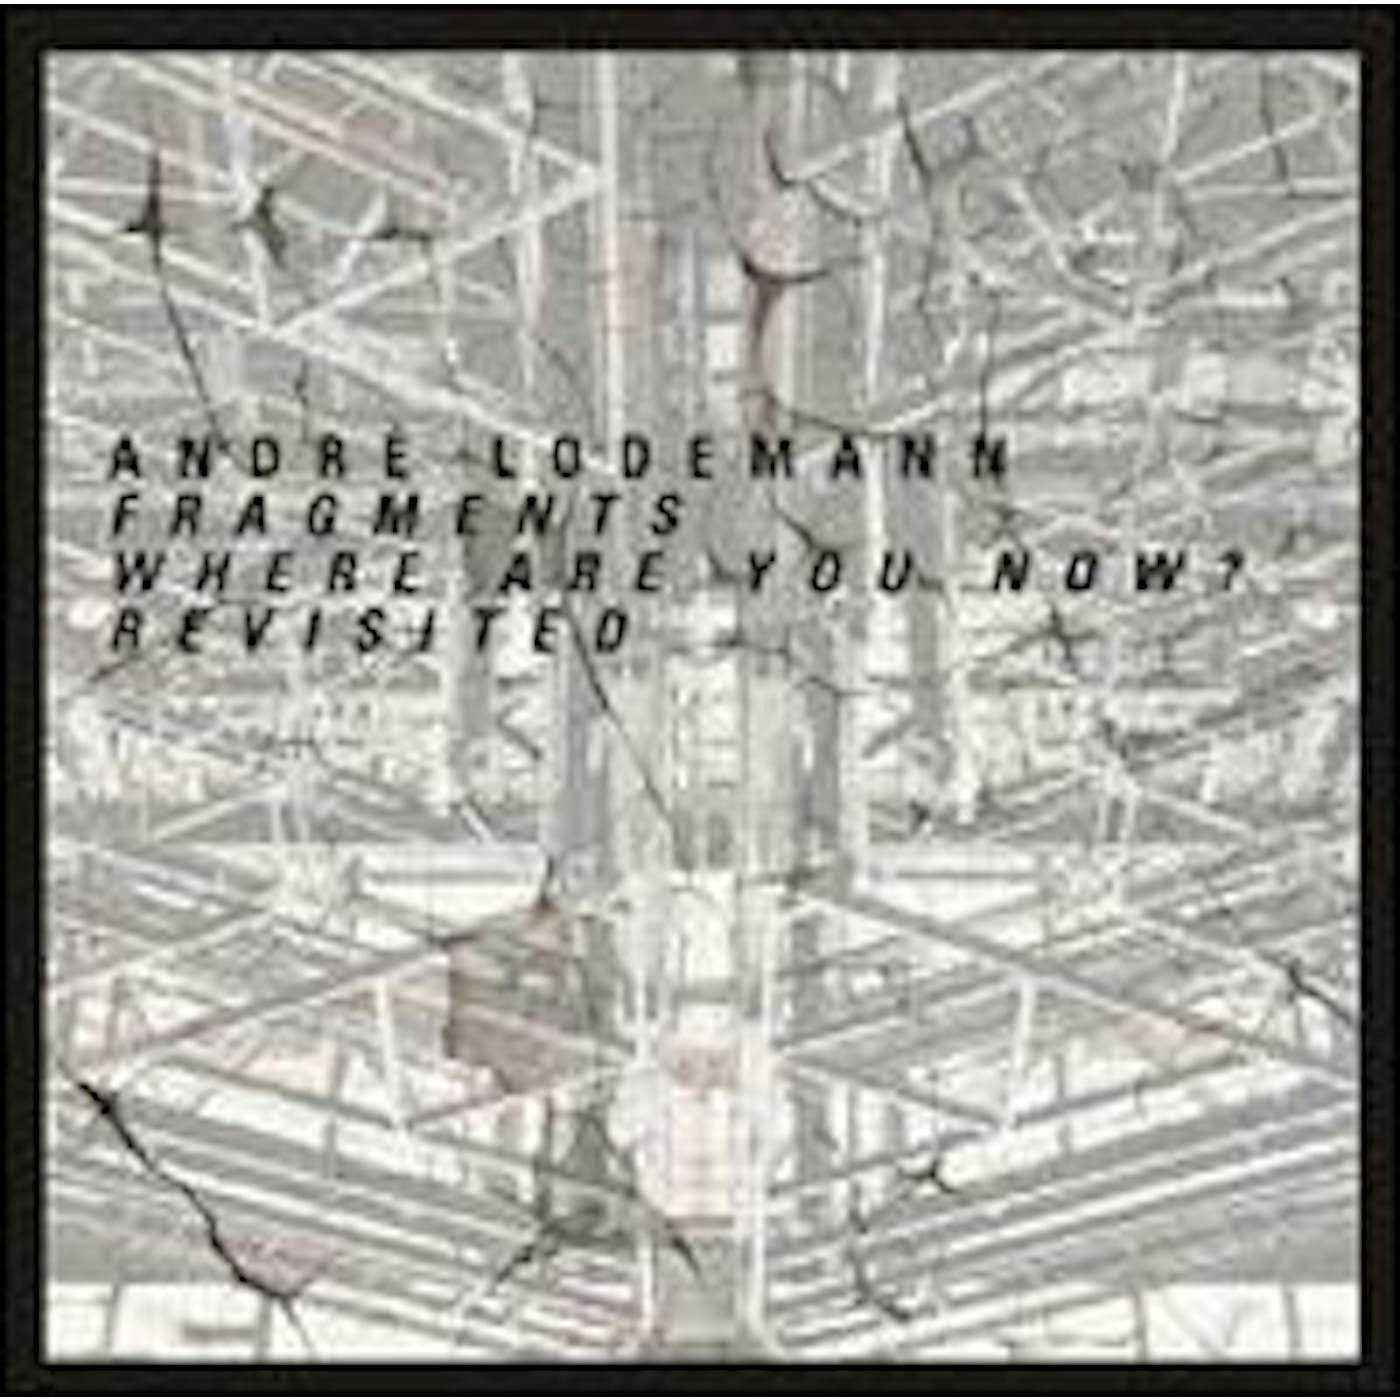 Andre Lodemann FRAGMENTS WHERE ARE YOU NOW? REVISITED (EP) Vinyl Record